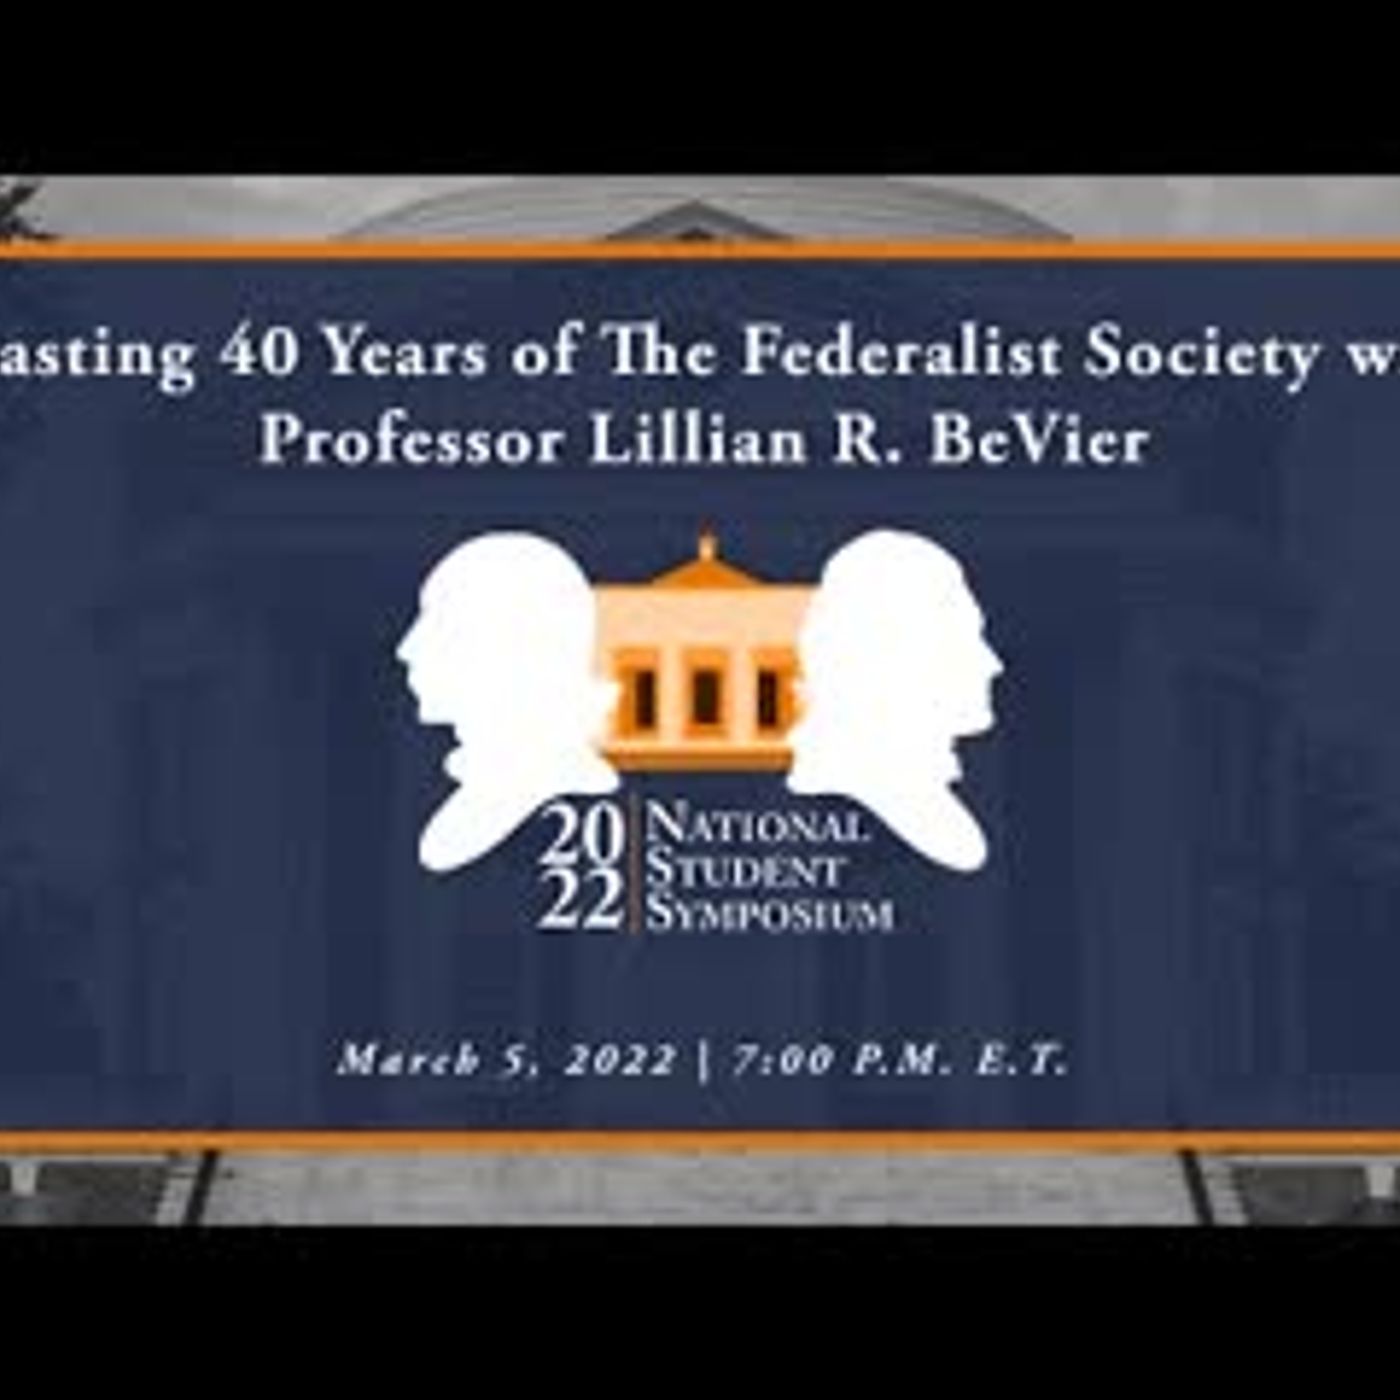 Toasting 40 Years of The Federalist Society with Professor Lillian R. BeVier